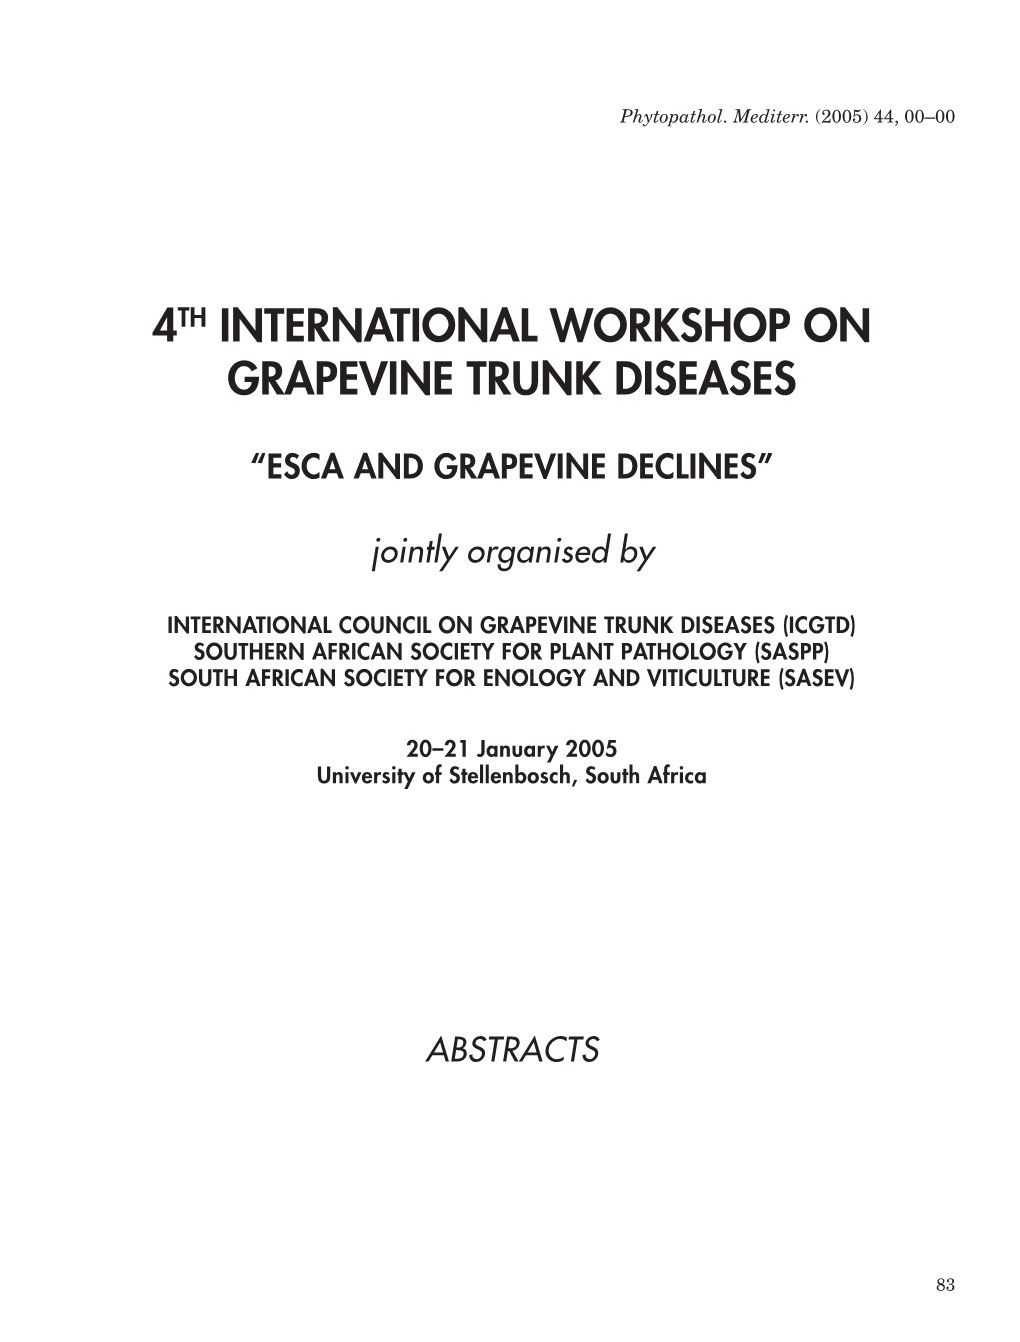 Abstracts of the 4Th International Workshop on Grapevine Trunk